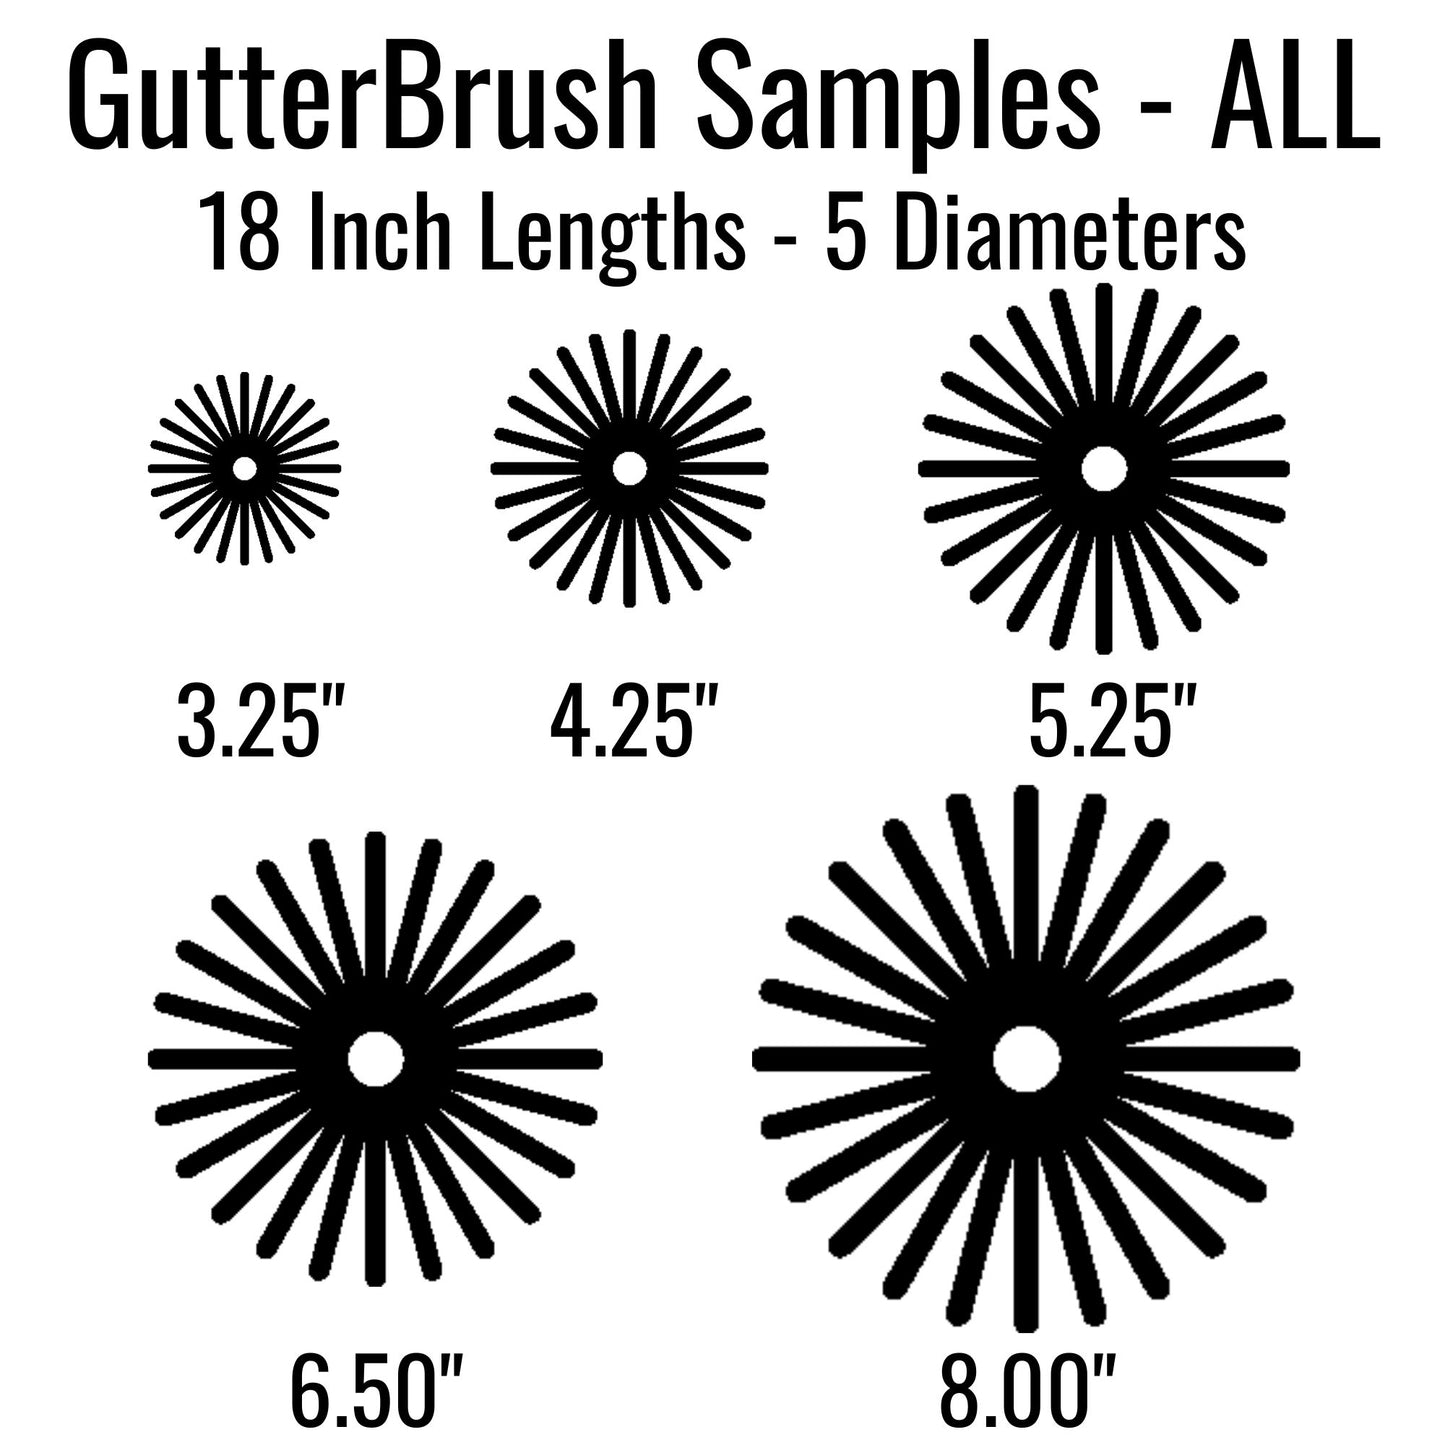 Gutter Guard Samples - ALL Sizes